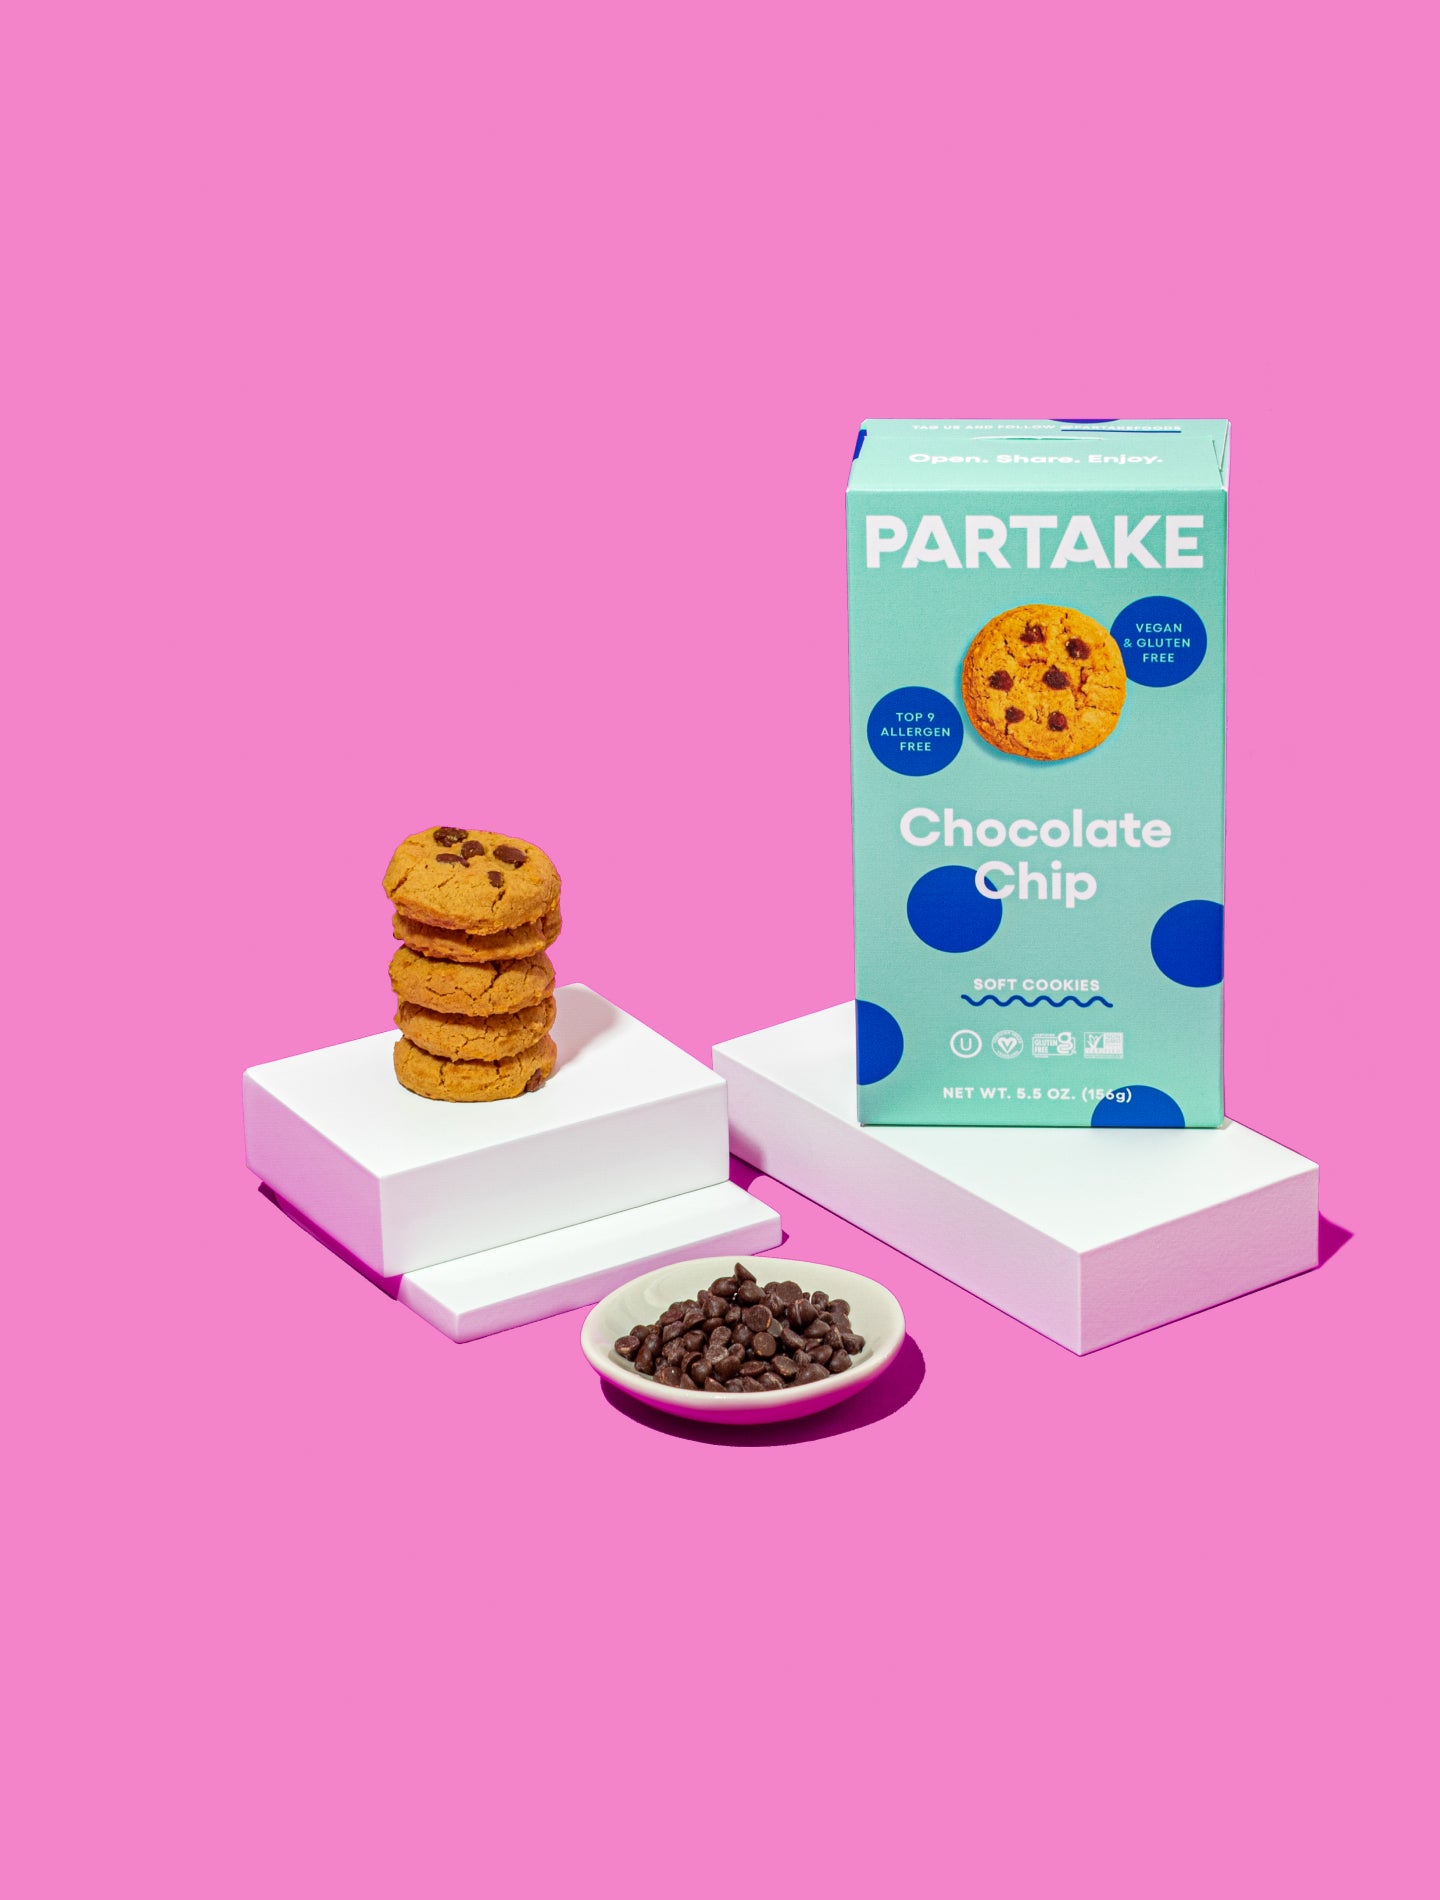 Snack Pack - Soft Baked Chocolate Chip